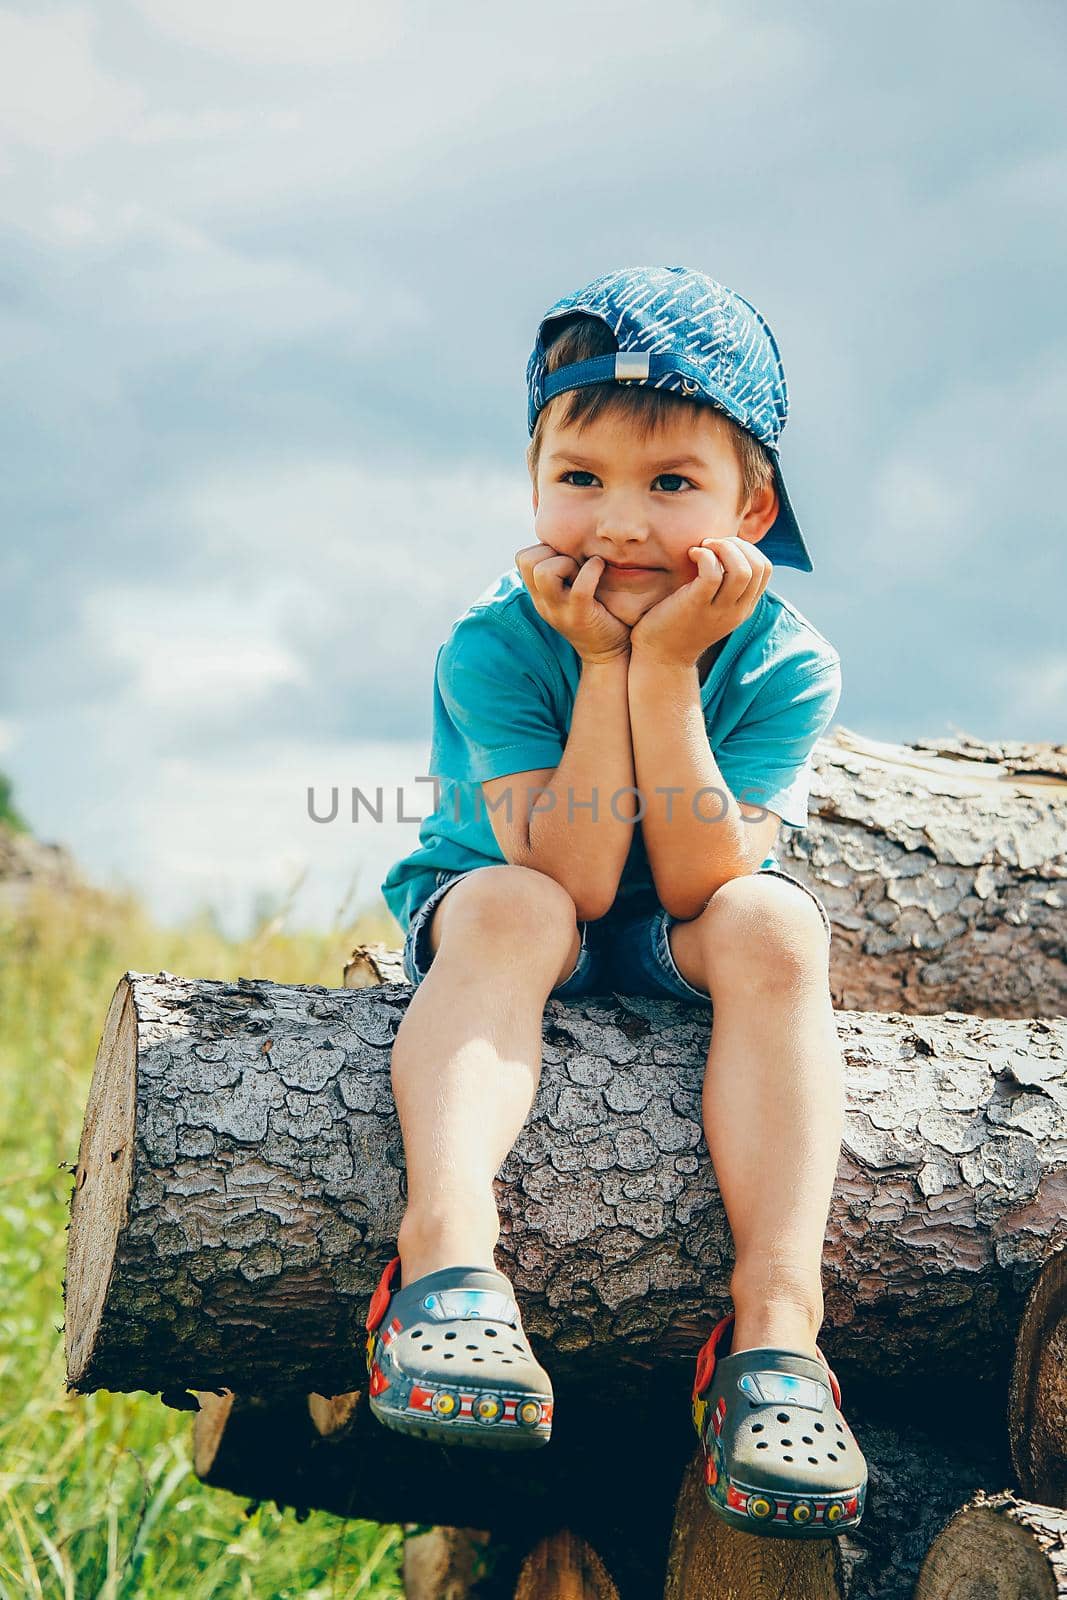 A small child in a blue baseball cap and short denim shorts sits on a log and laughs merrily